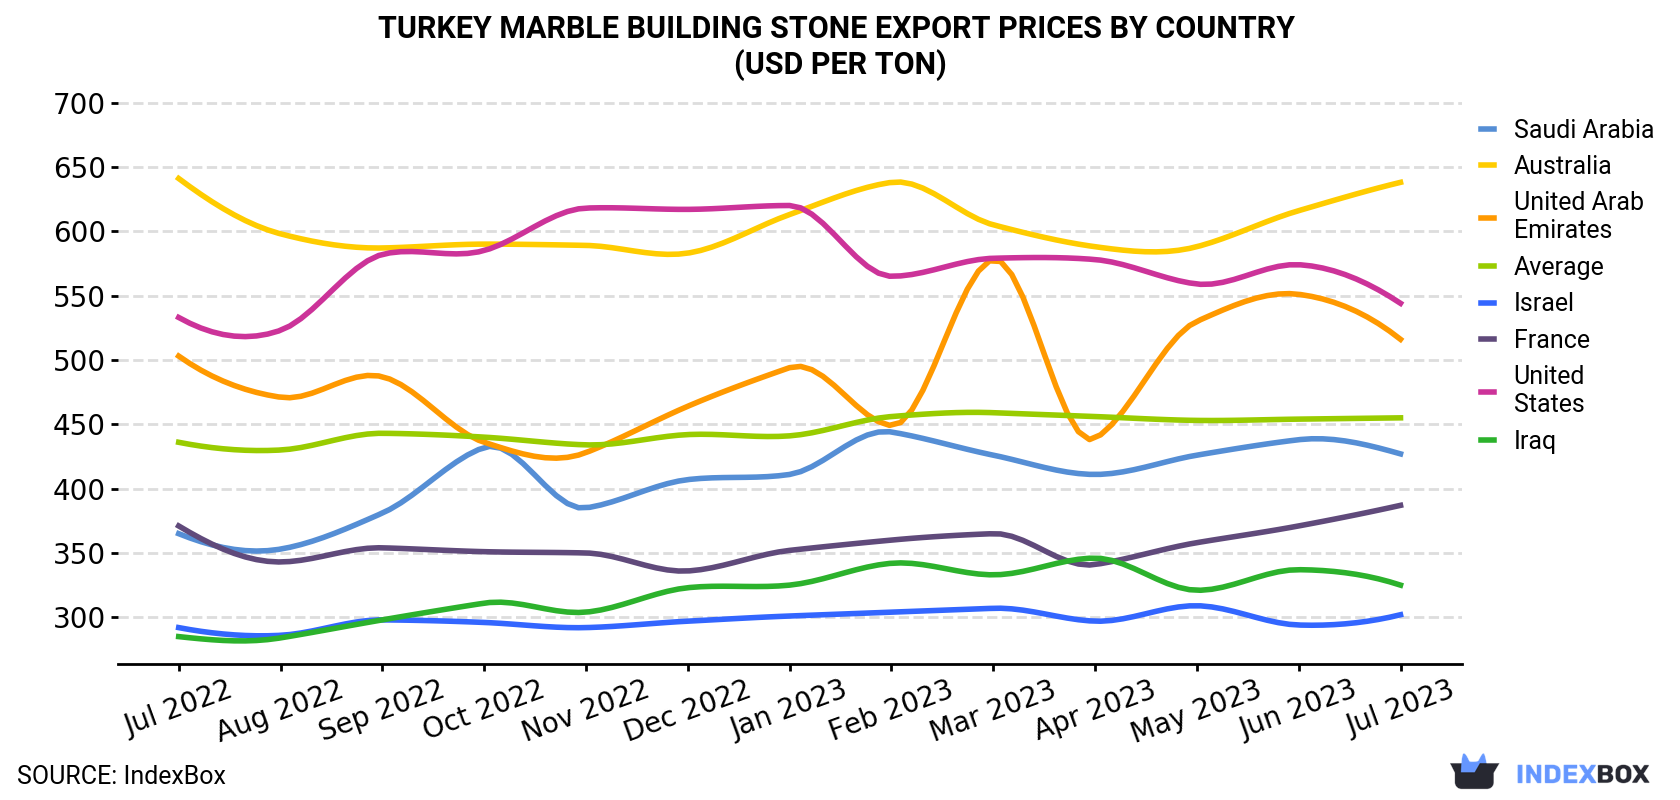 Turkey Marble Building Stone Export Prices By Country (USD Per Ton)